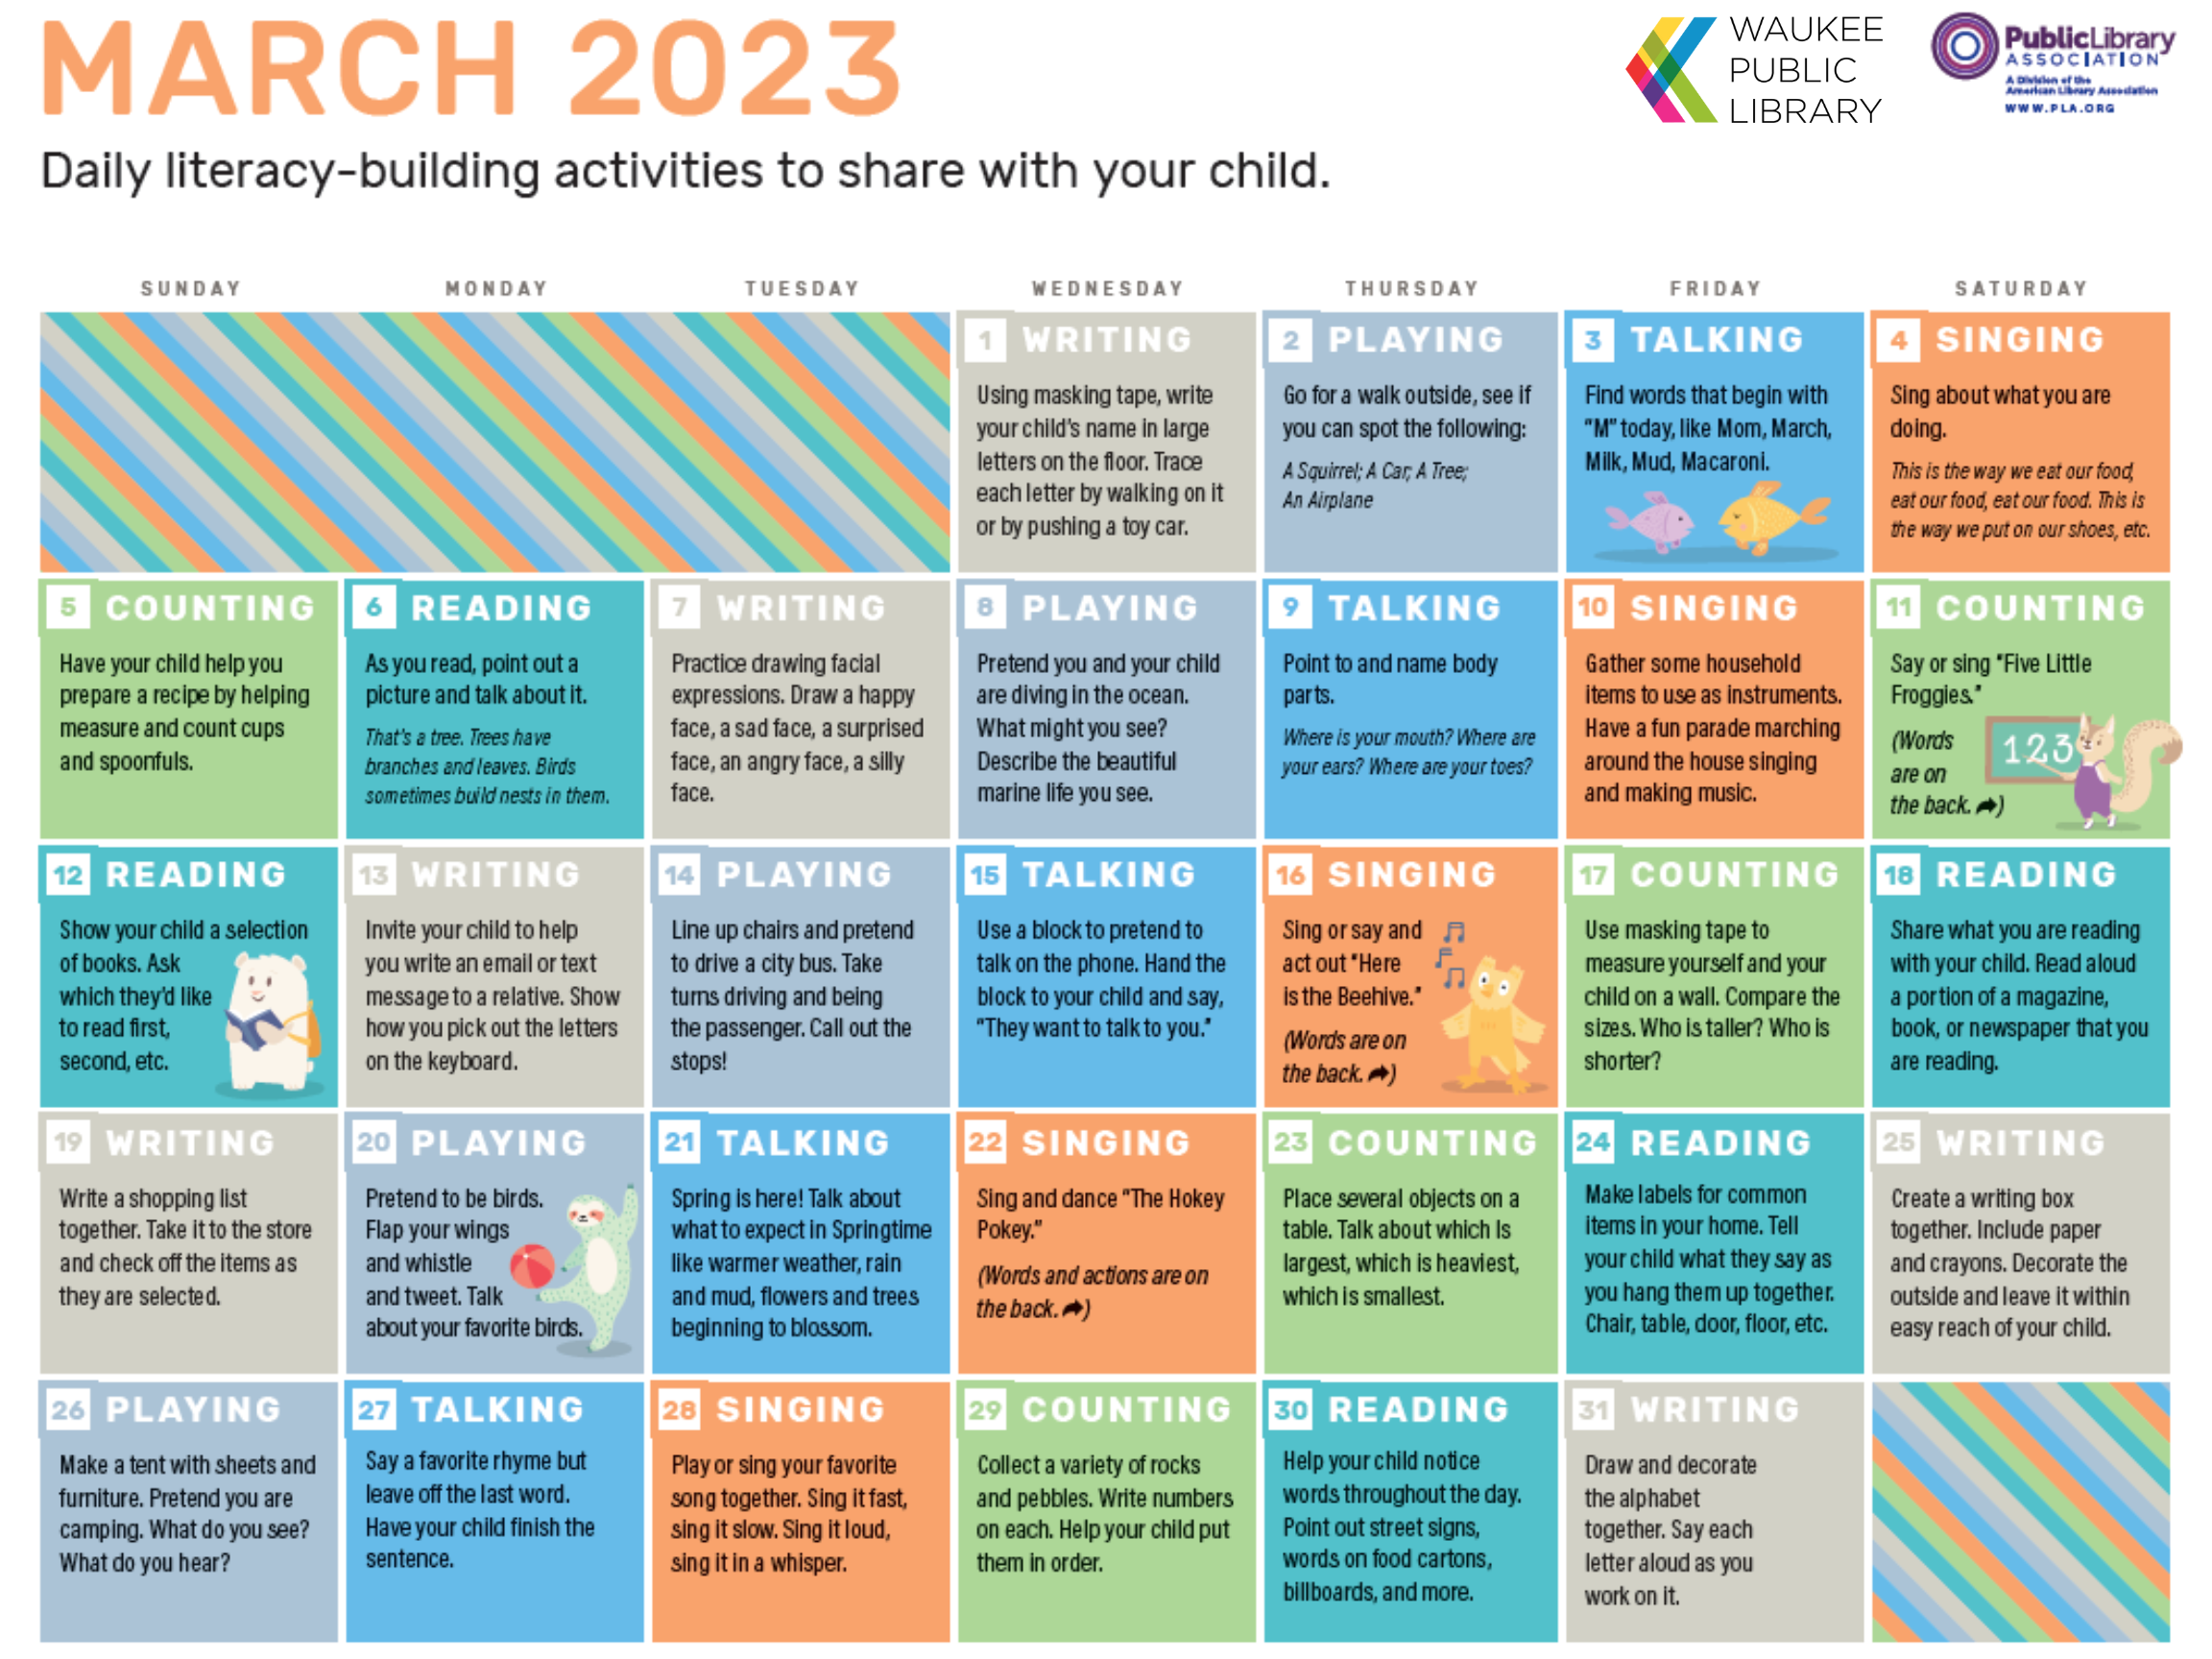 Image of March 2023 Early Learning calendar.